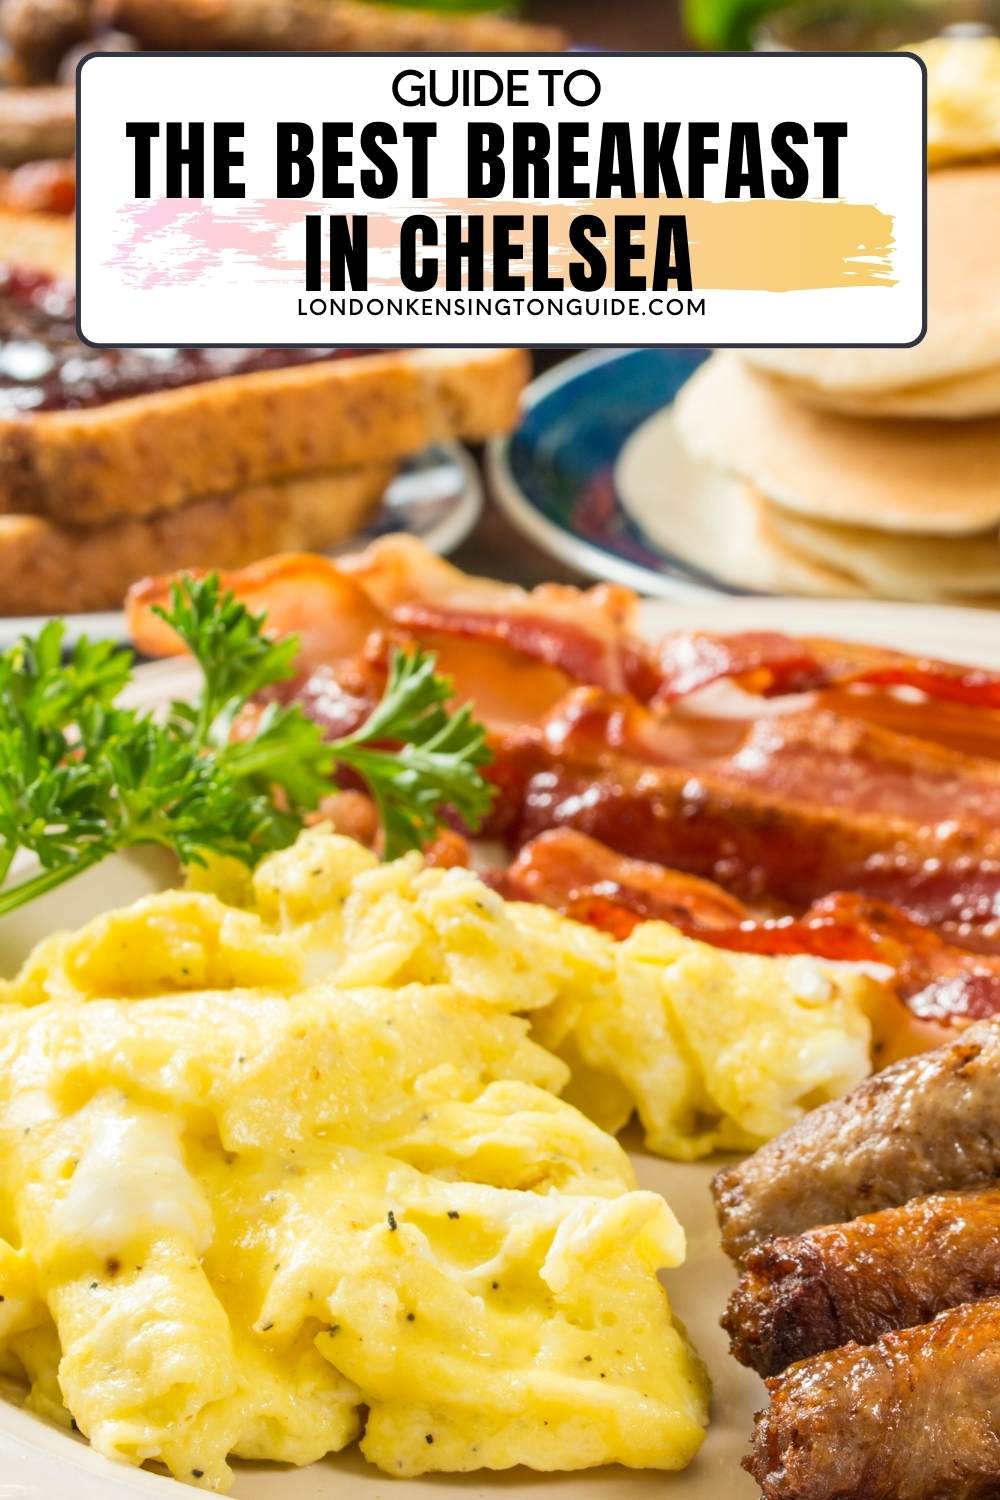 Guide to the best breakfast in Chelsea. Whether you are in the mood for a late breakfast, full English, European or Arabic inspired breakfast, Chelsea has it all. Here are the best spots for a Chelsea Breakfast. breakfast on kings road | breakfast in Sloane square | breakfast in Chelsea london | best breakfast in Chelsea london | best breakfast Chelsea | breakfast in Chelsea | breakfast restaurants in Chelsea | 